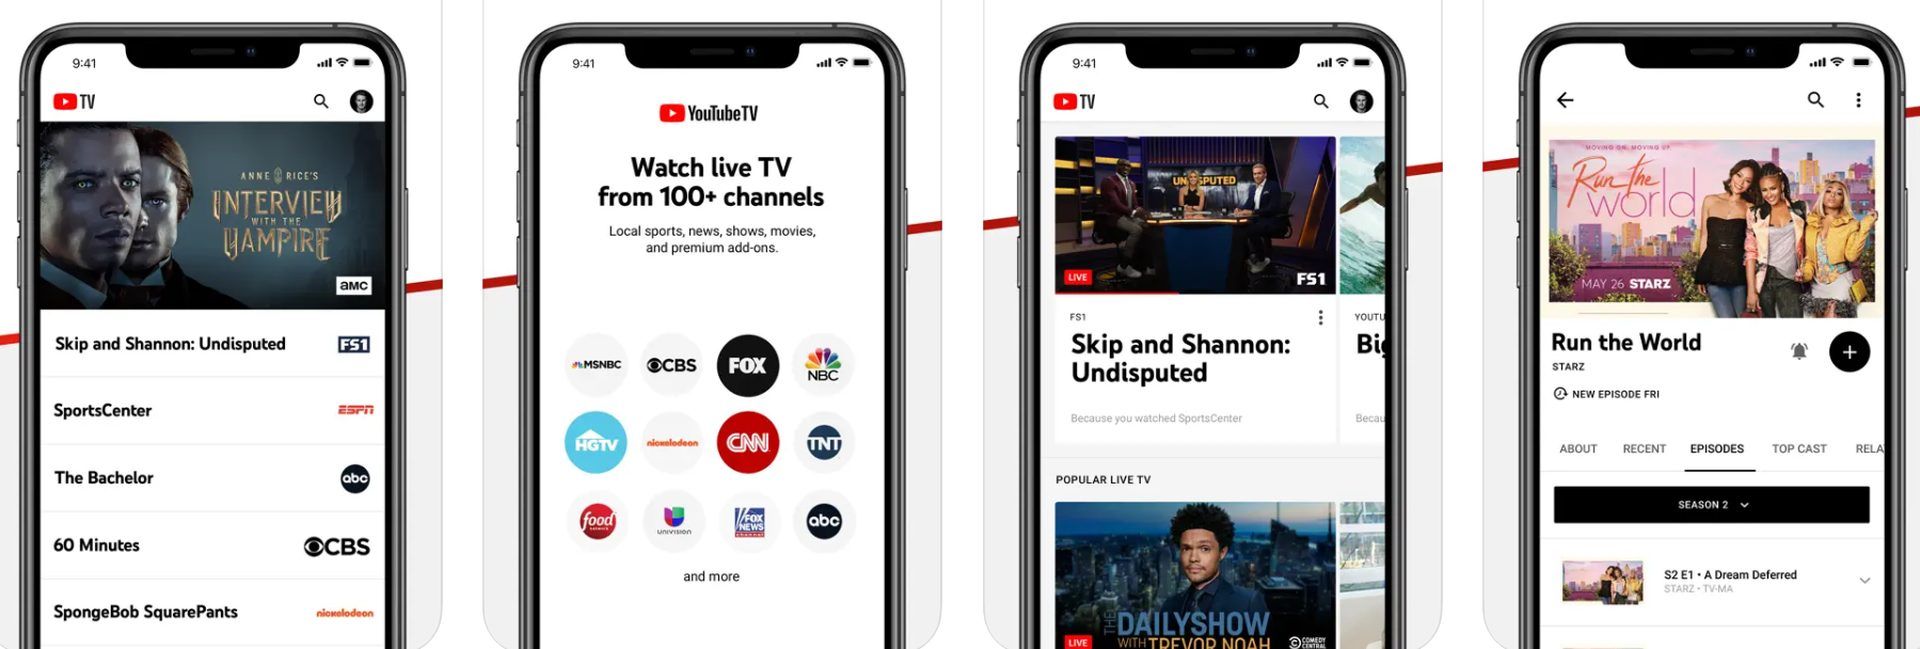 How to fix YouTube TV not working issues? Keep reading and learn everything you need to about what to do right now.